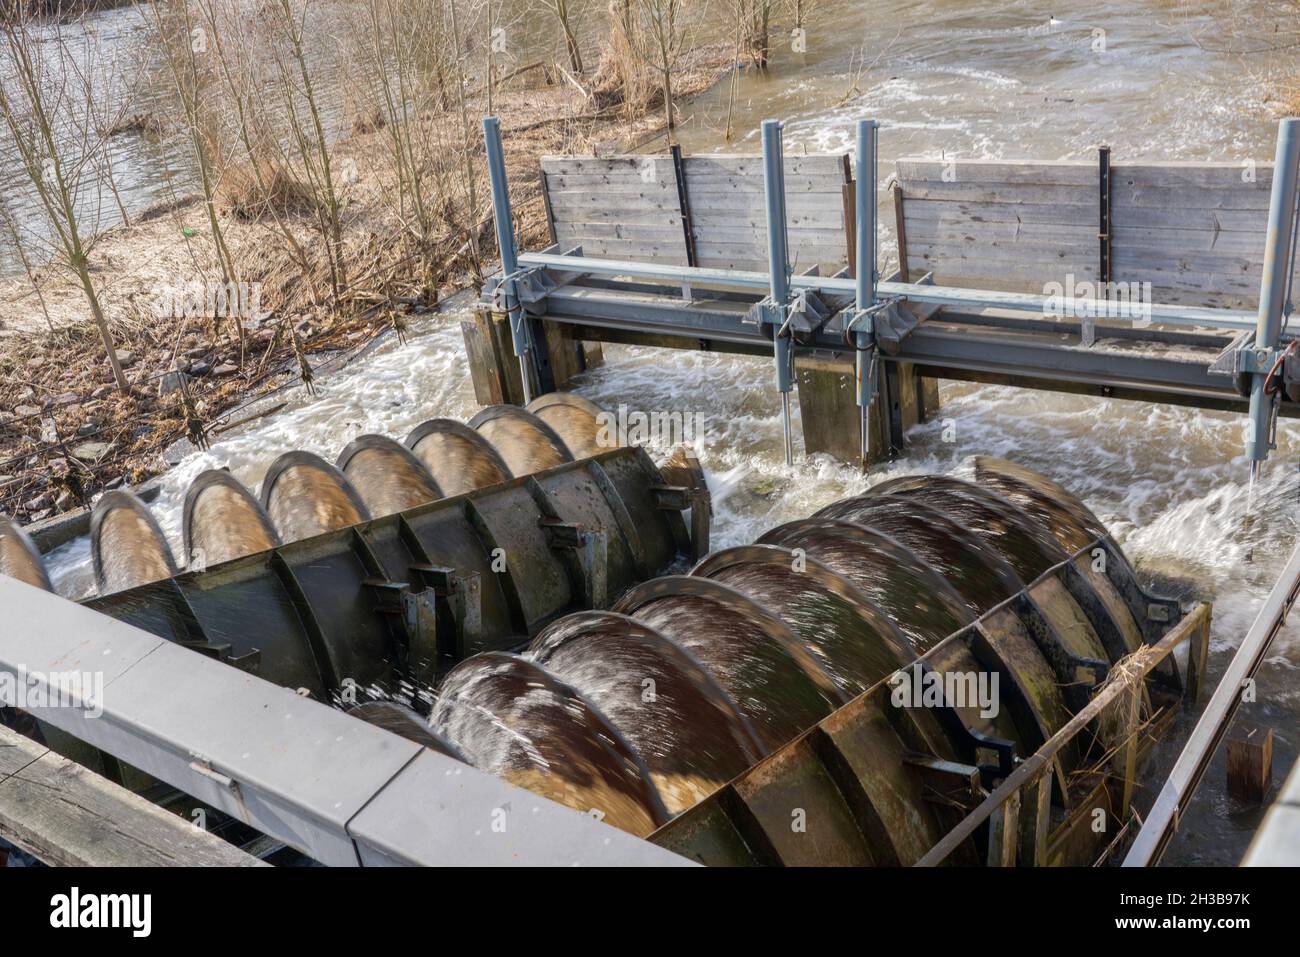 A screw turbine at a small hydro power plant, River Werra, Hannoversch Münden, Lower Saxony, Germany, Europe Stock Photo